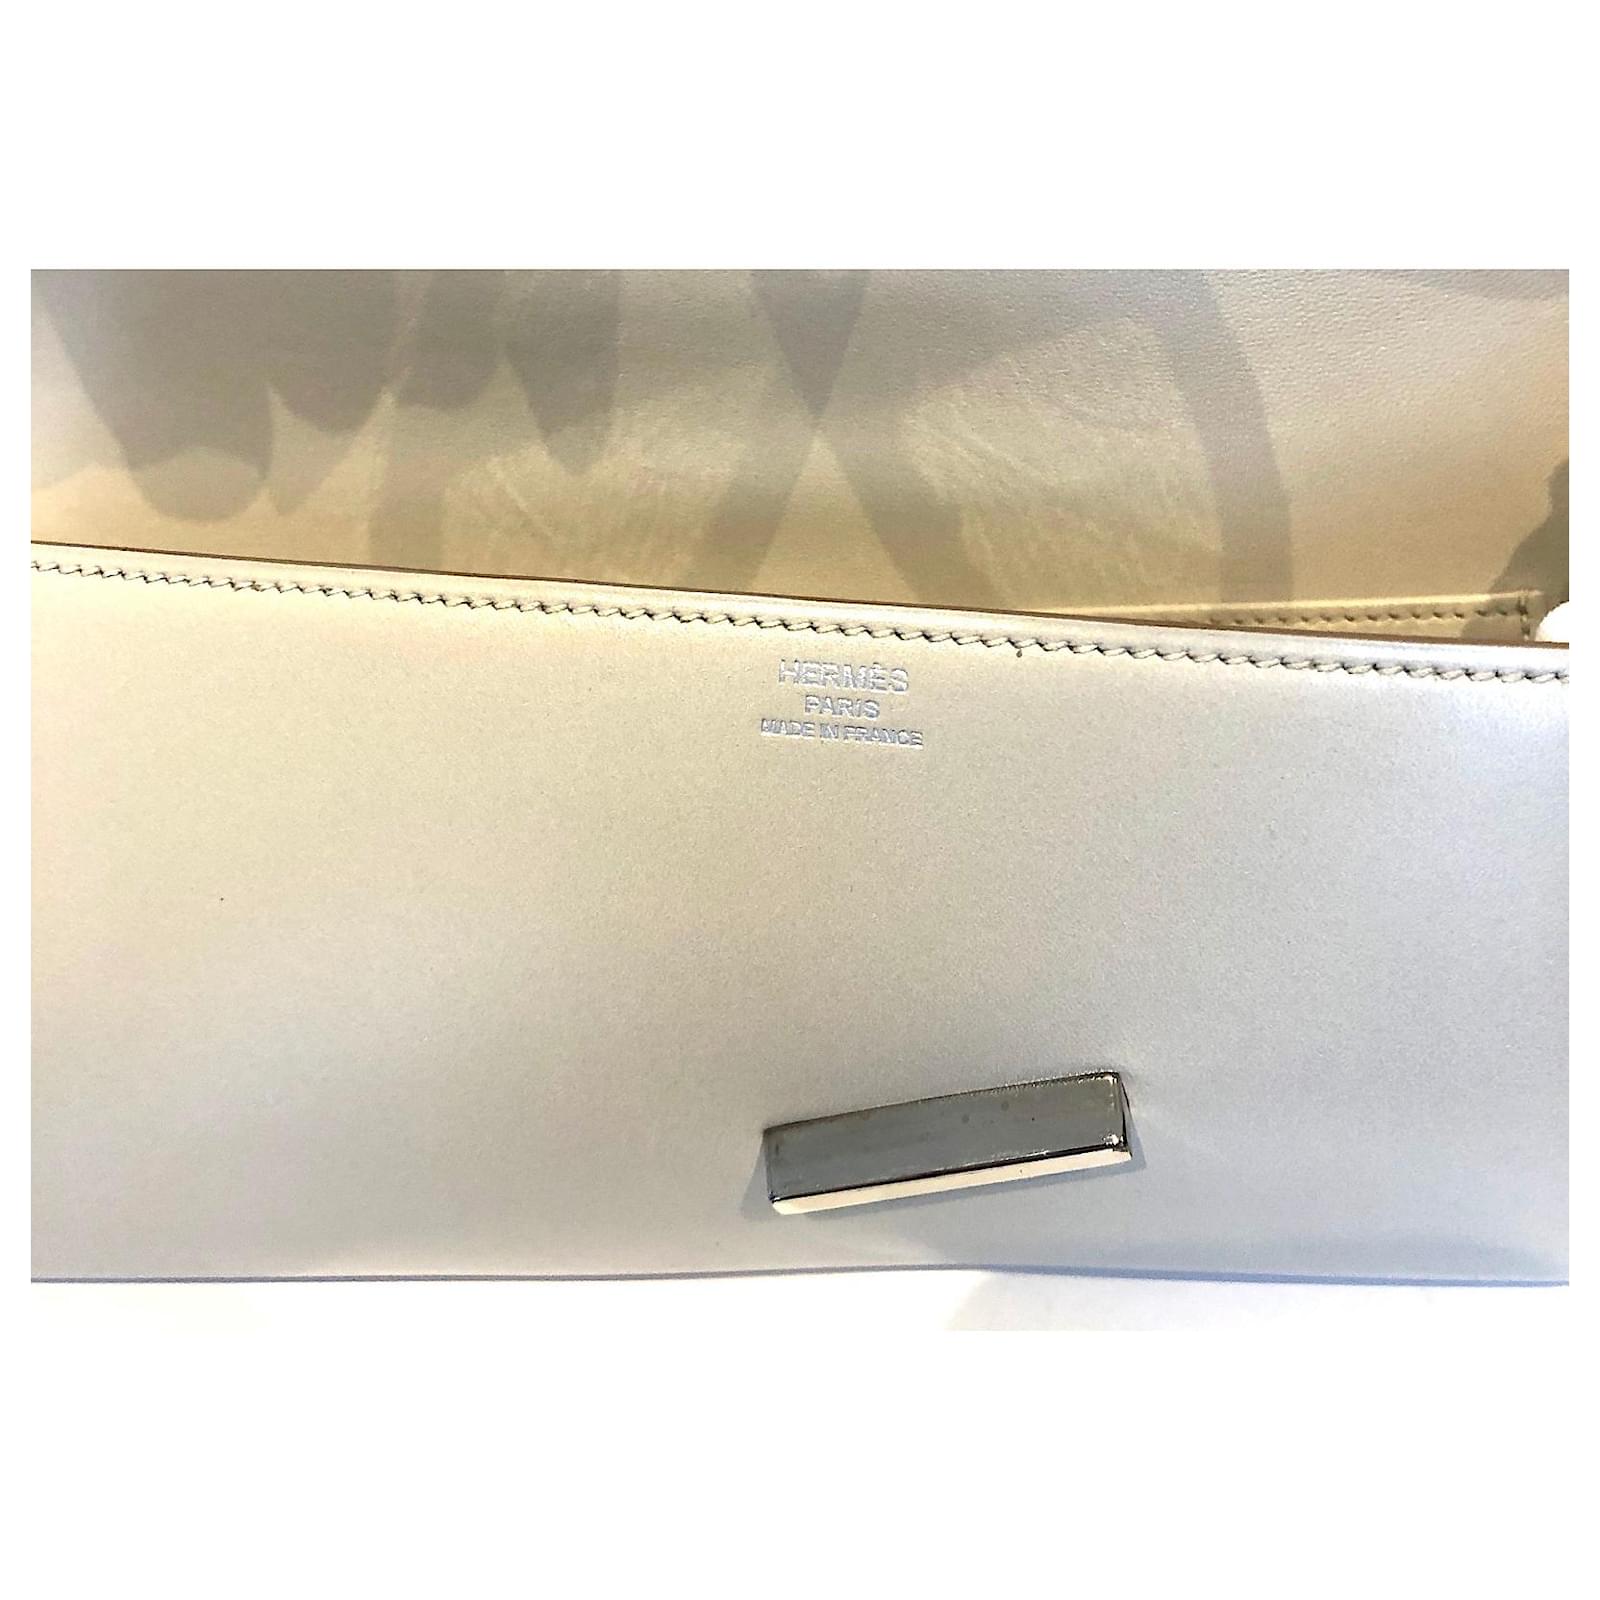 Preowned Hermes Box Egee Clutch